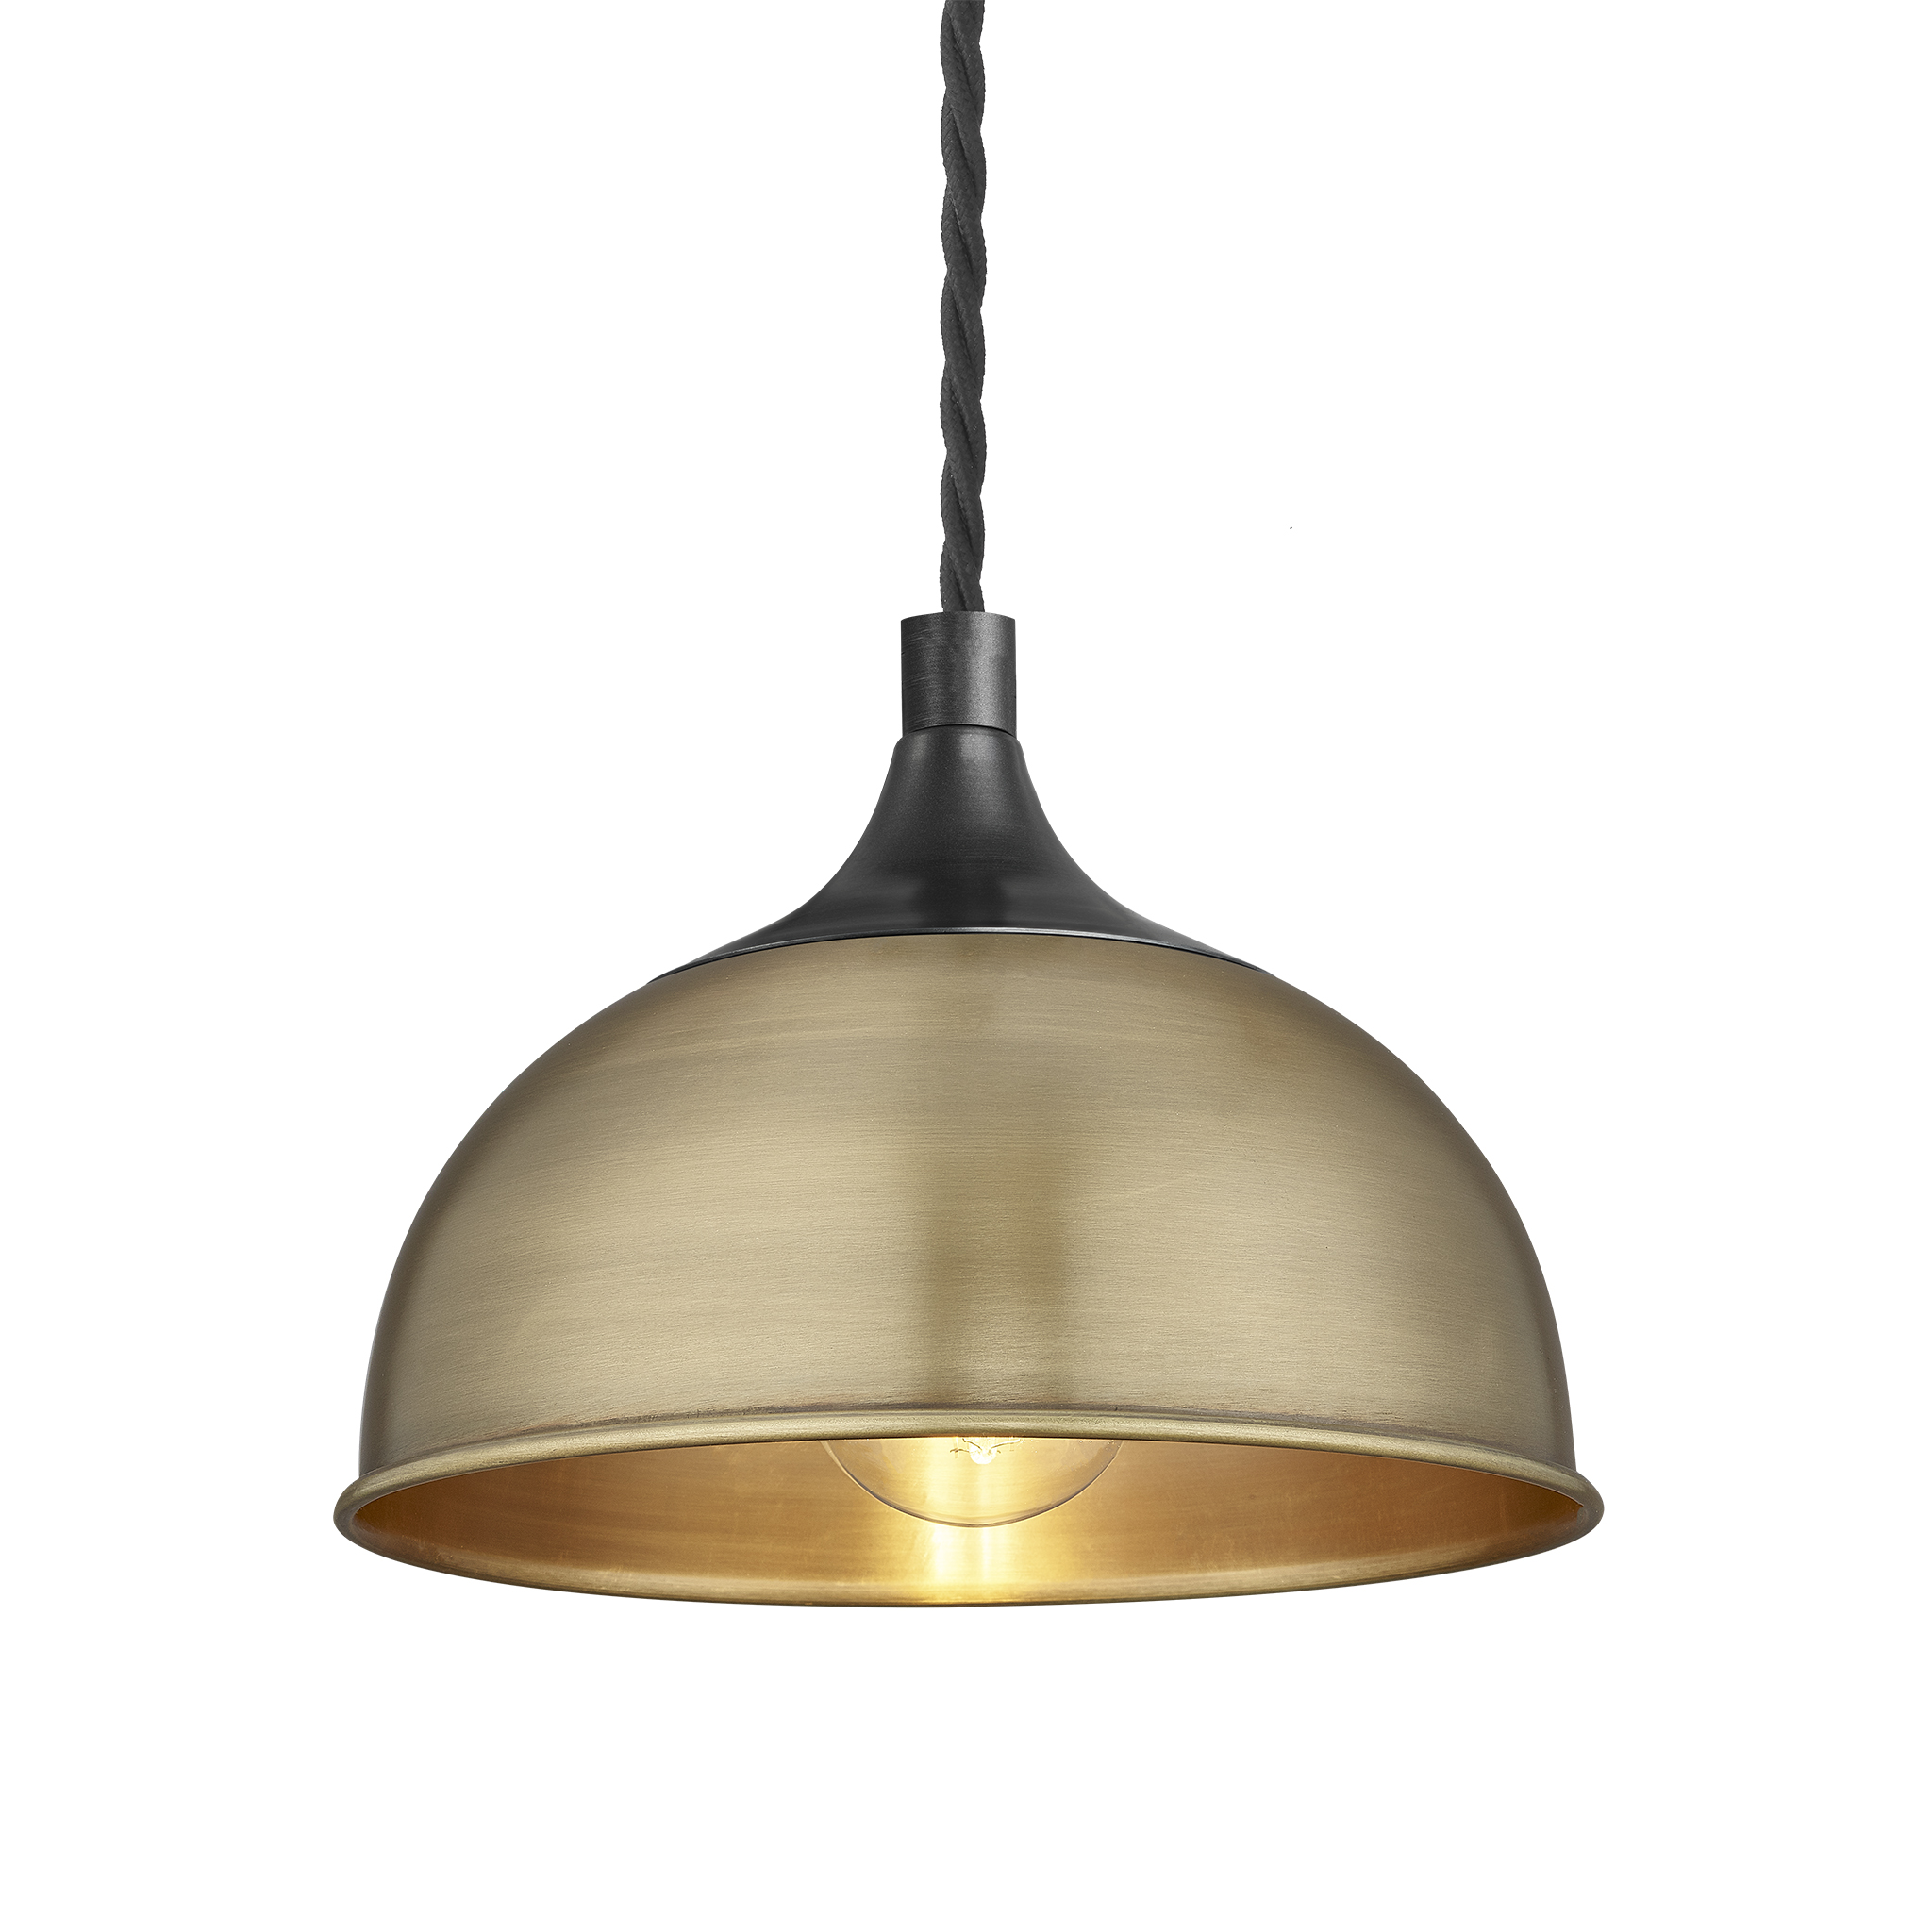 Chelsea Dome Pendant - 8 Inch - Brass - Pewter Holder